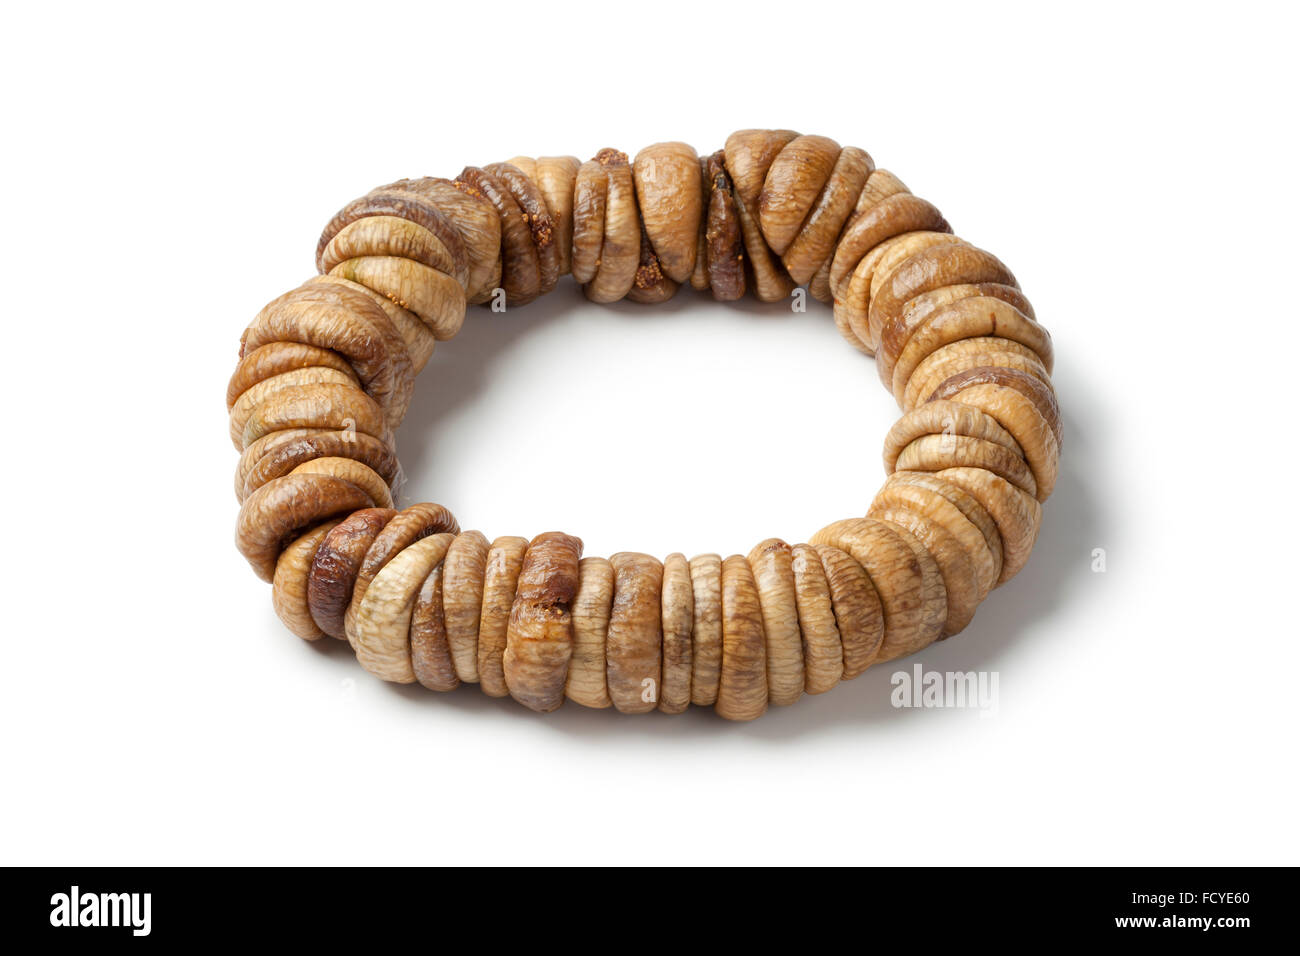 Traditional threaded Moroccan dried figs on white background Stock Photo